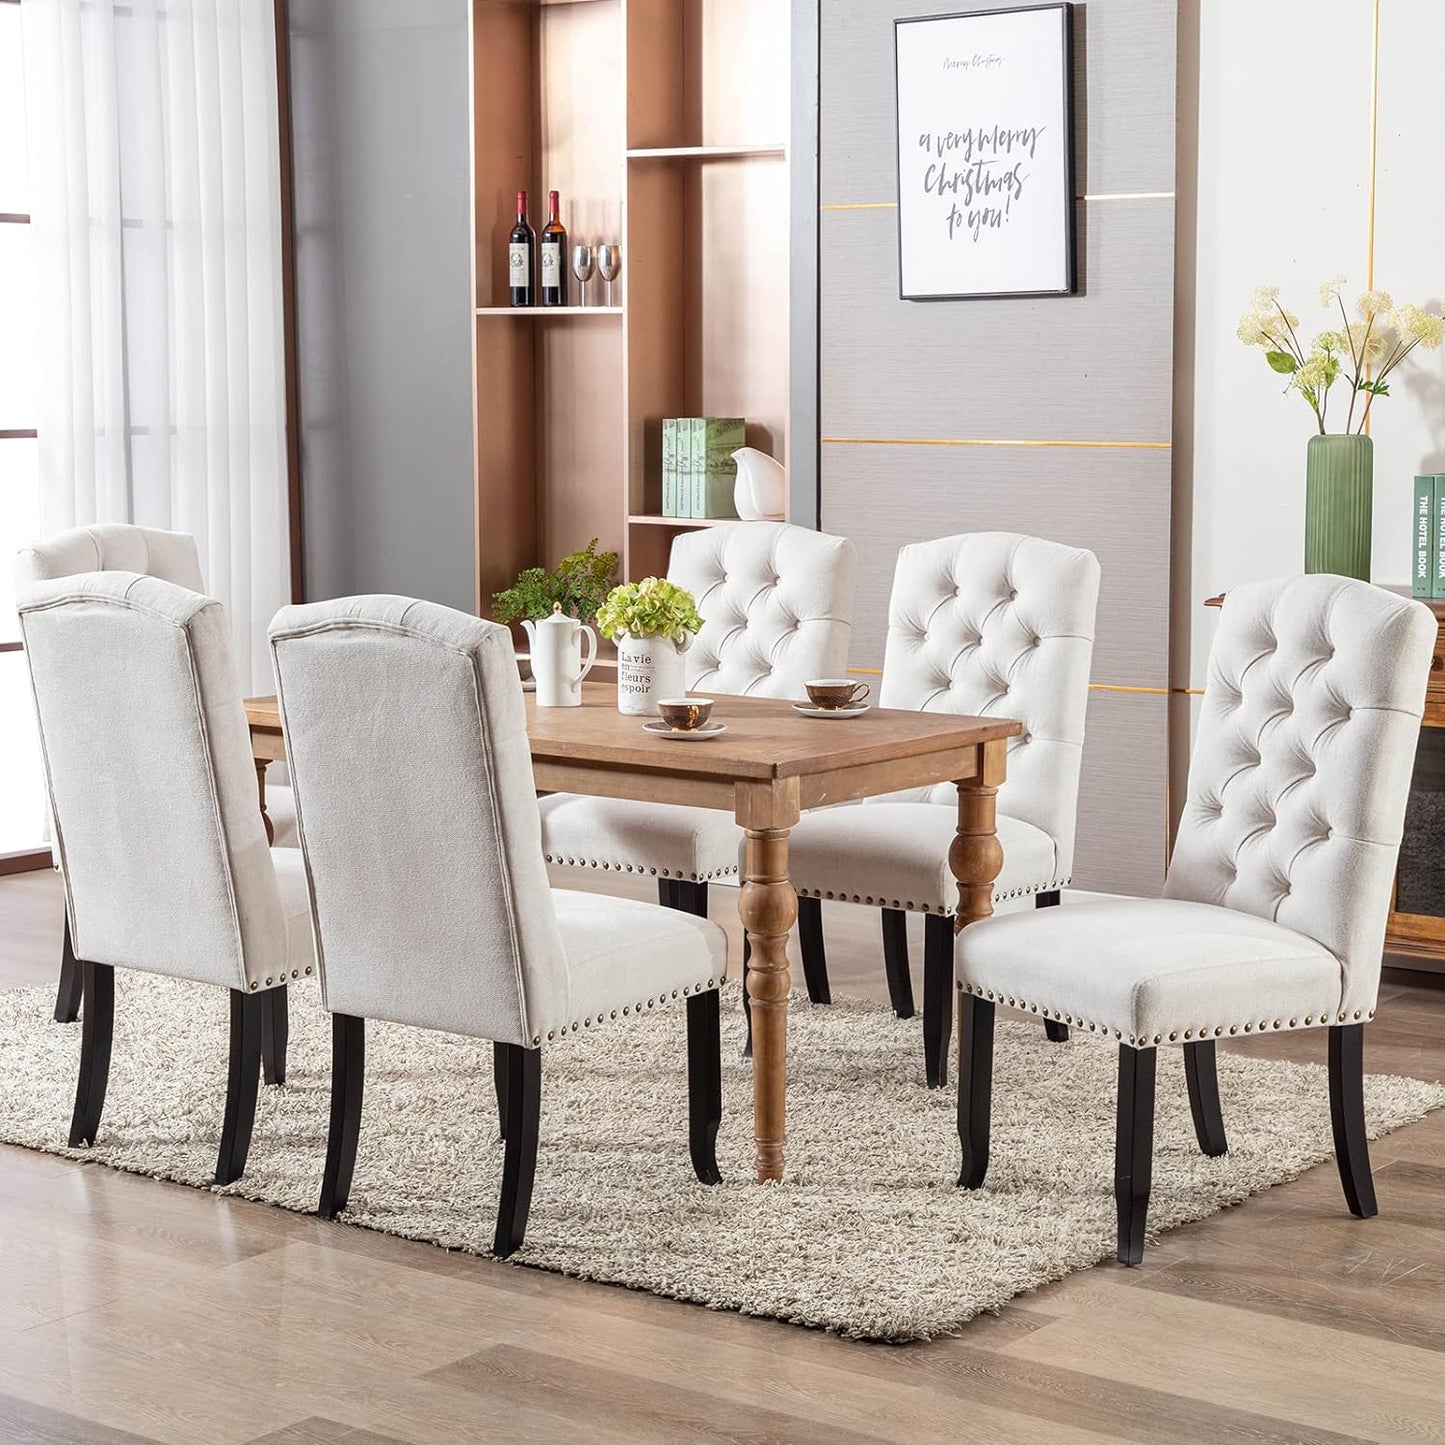 Button Tufted Dining Chairs Set of 2, Upholstered Parsons Dining Room Chairs, Fabric Kitchen Side Chair with Nailhead Trim and Wood Legs, Beige